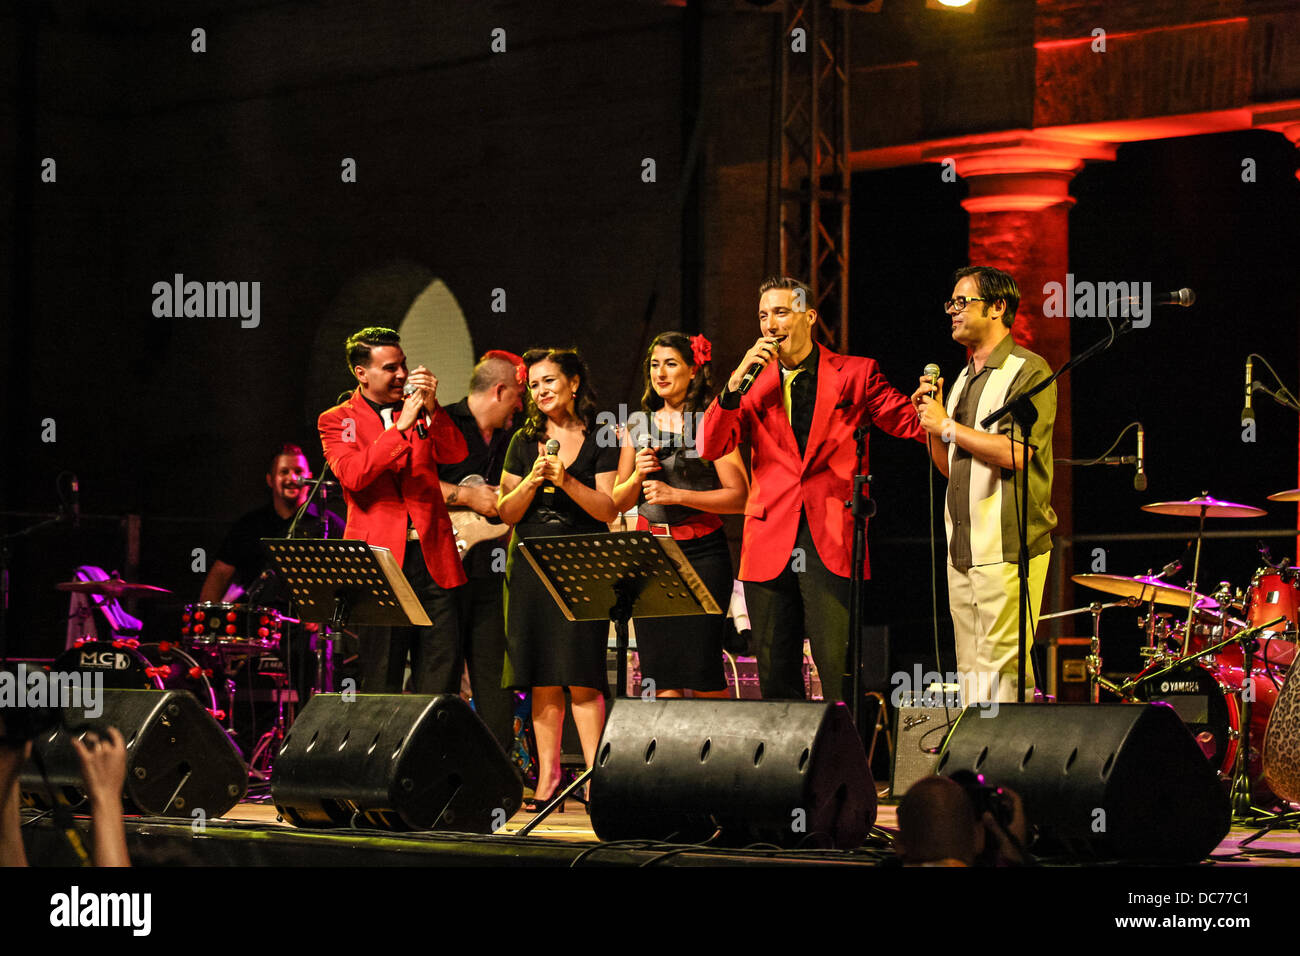 Senigallia, Italy. 9th August, 2013. Summer Jamboree 6th day  [International Festival 60's revival Rock & Roll] The Adels + GREG + The Acappella Swingers Performing at the Main Stage in the Foro Annonario, Senigallia, Italy on Aug 09, 2013. Credit:  Valerio Agolino/Alamy Live News Stock Photo